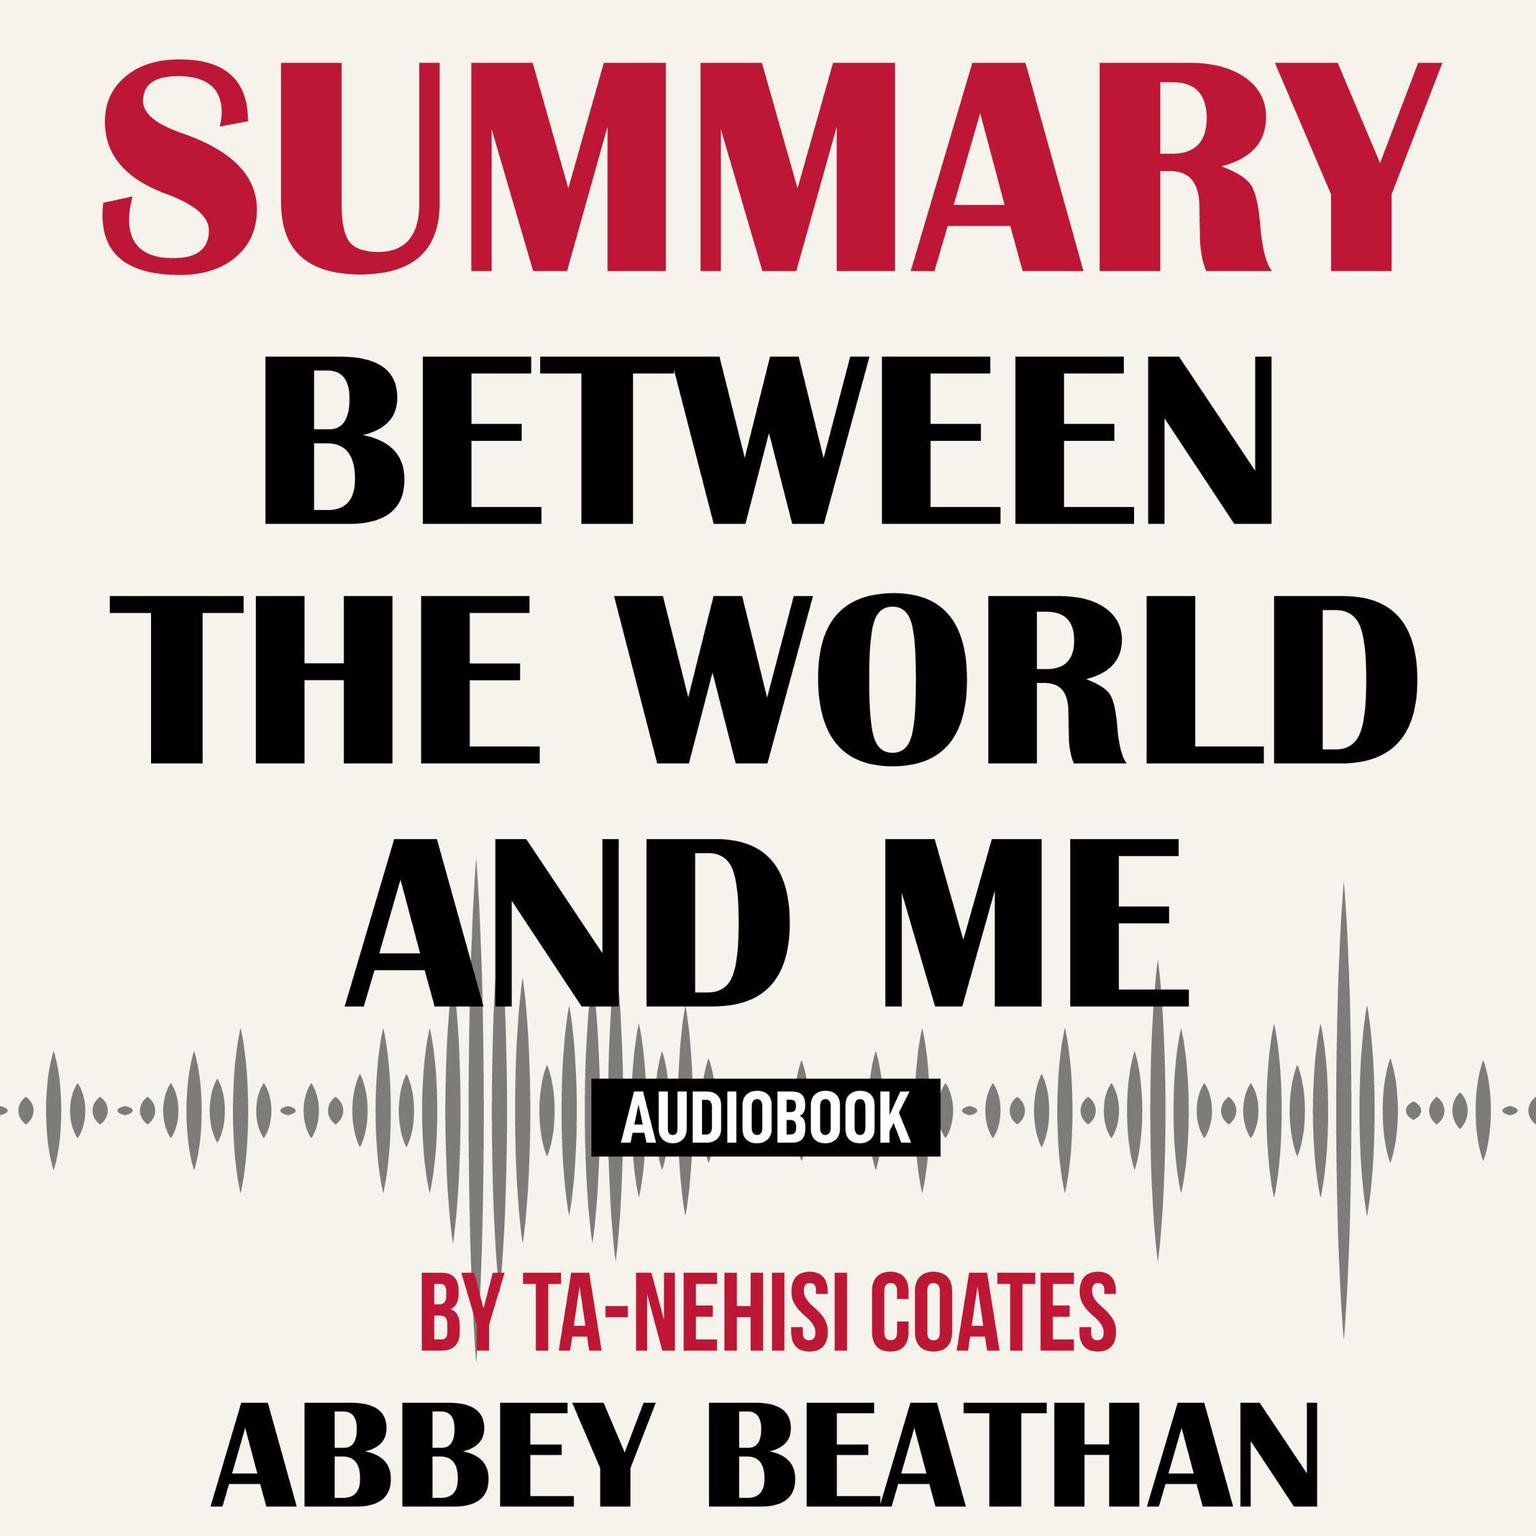 Summary of Between the World and Me by Ta-Nehisi Coates Audiobook, by Abbey Beathan